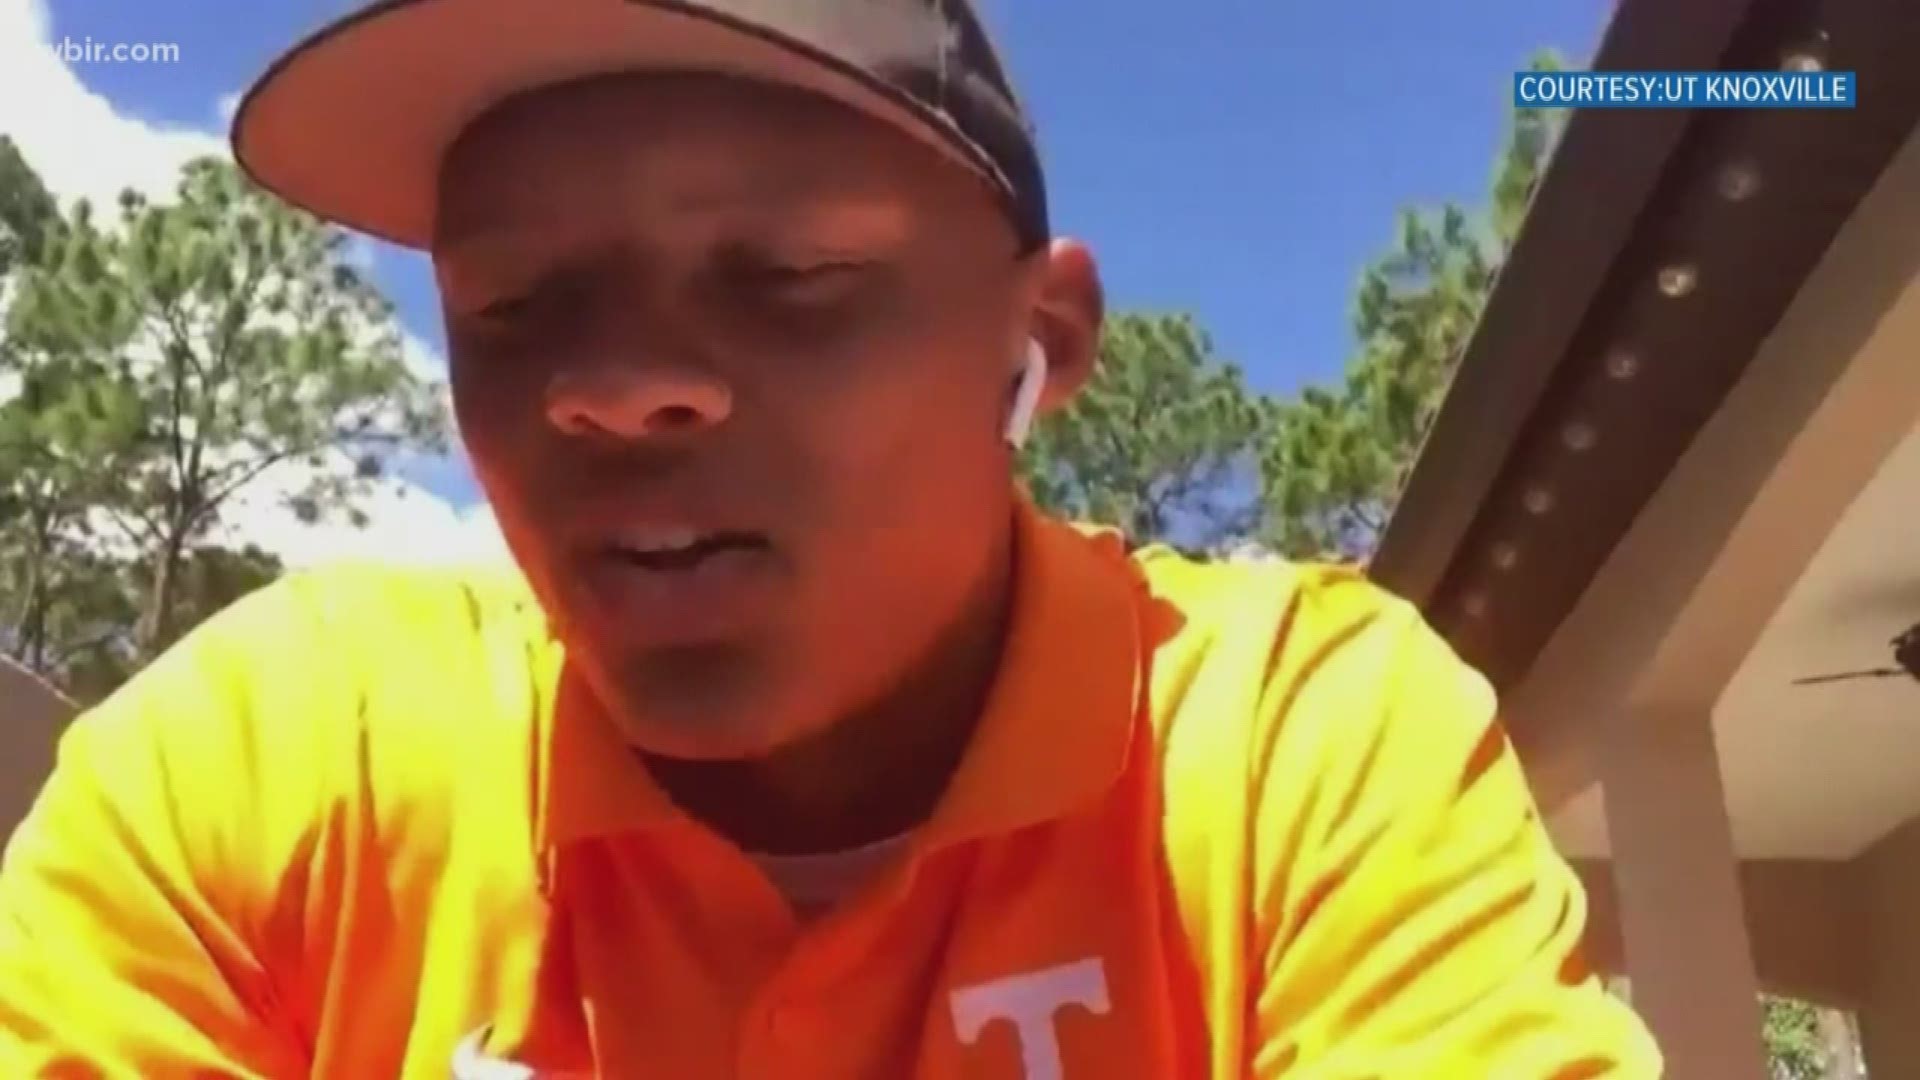 Former UT Quarterback, Josh Dobbs, made a special appearance at an online class at UT.